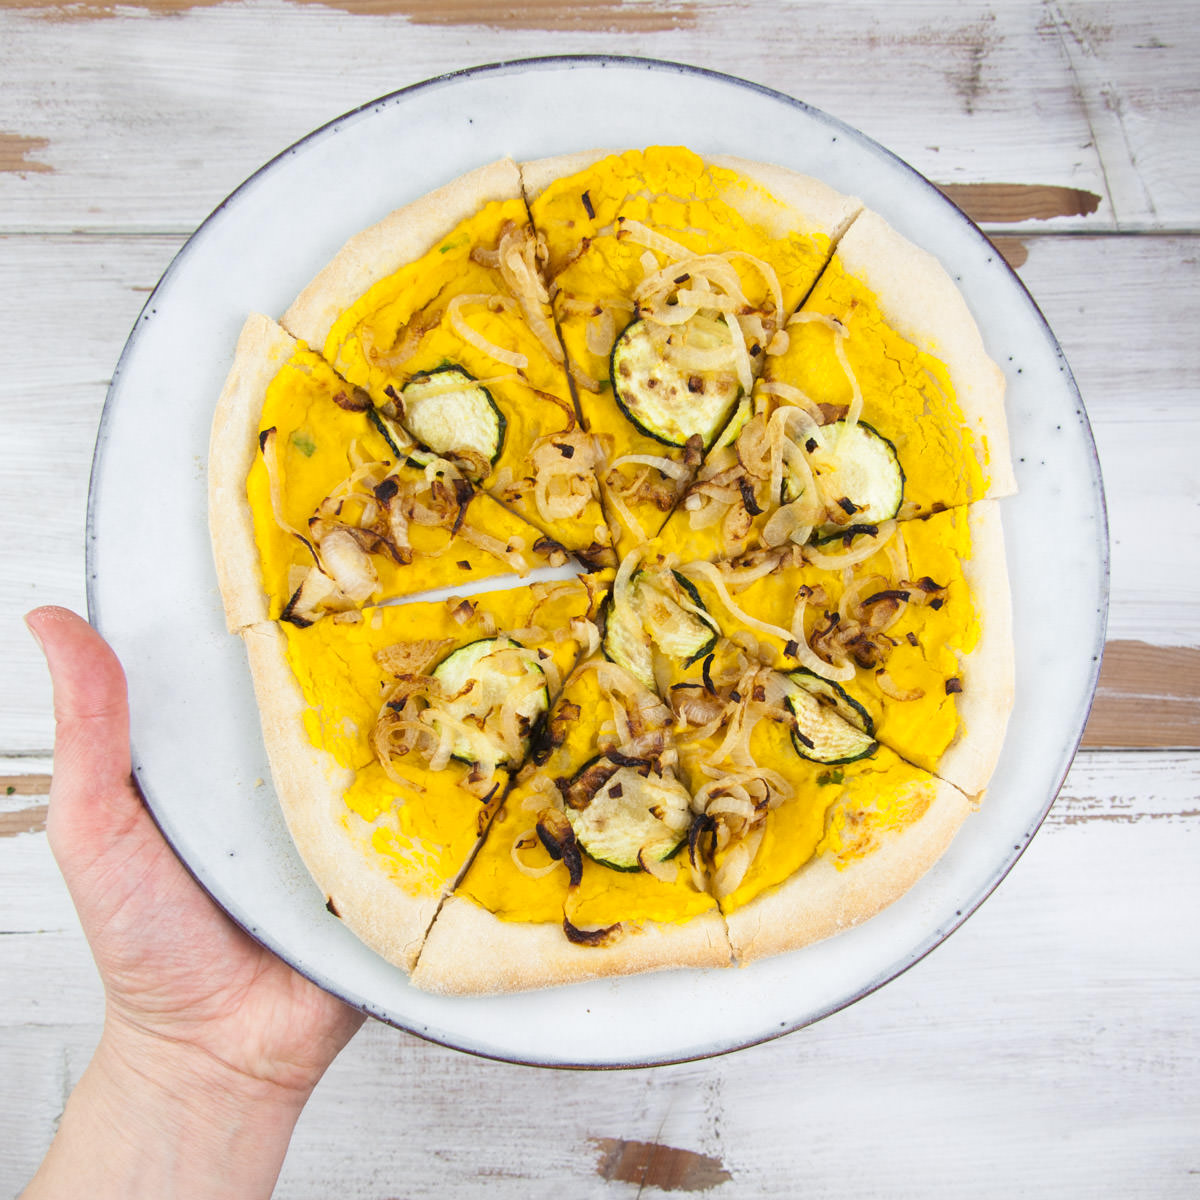 Vegan Pumpkin Pizza with caramelized onions and zucchini